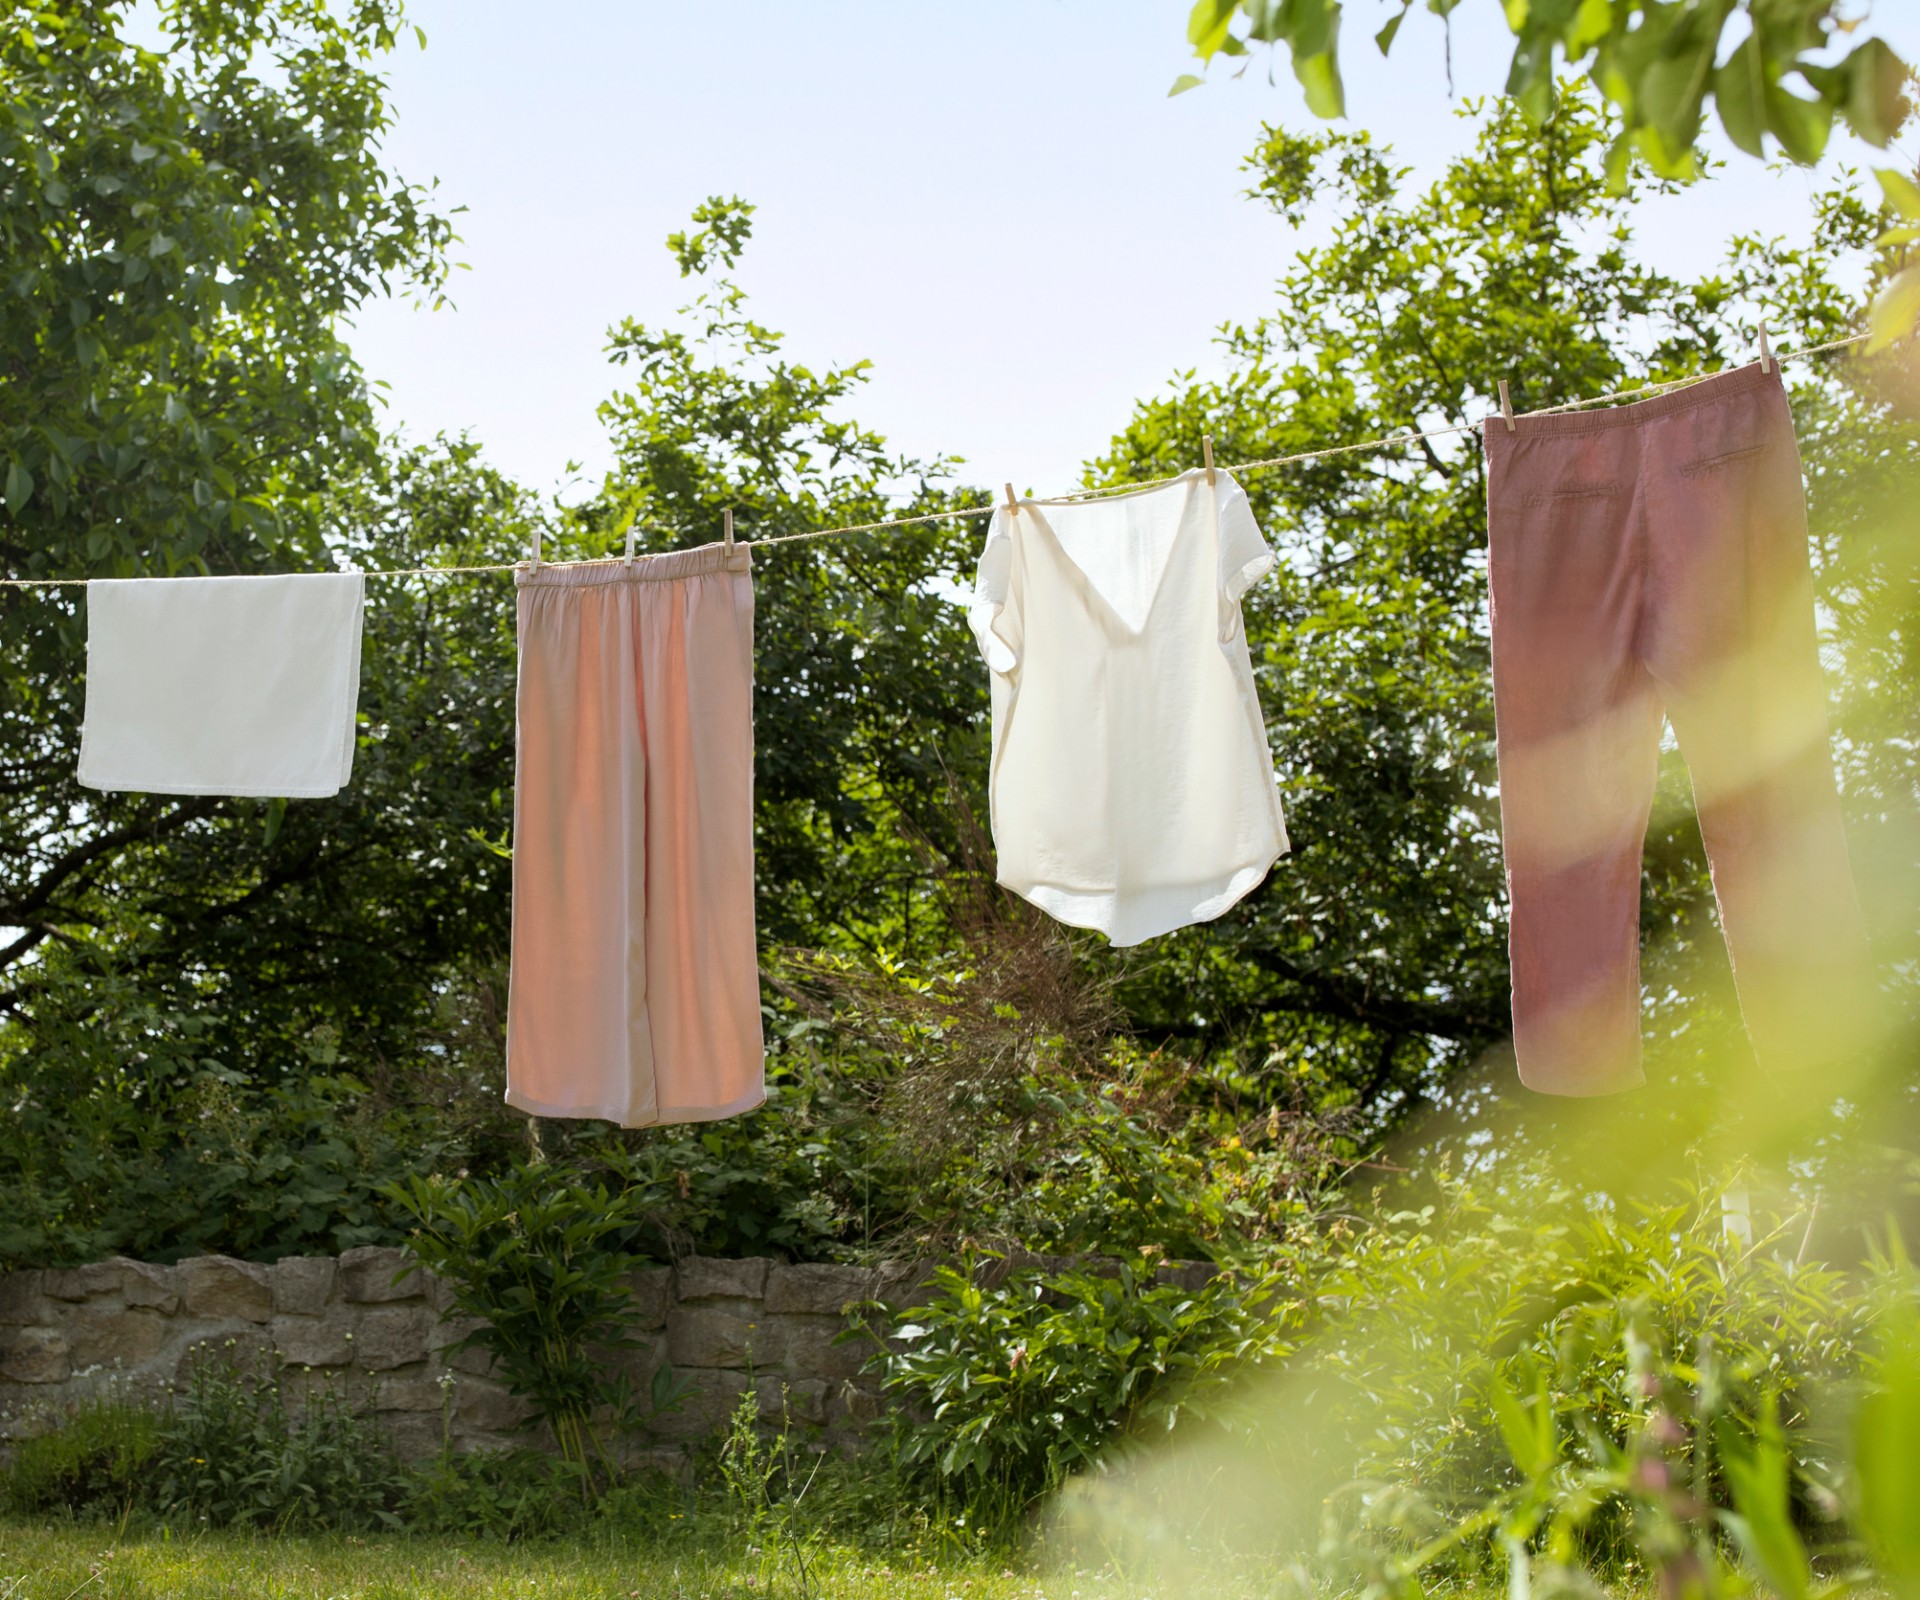 In a garden in front of a hedge hanging cloths and clothes on a clothesline